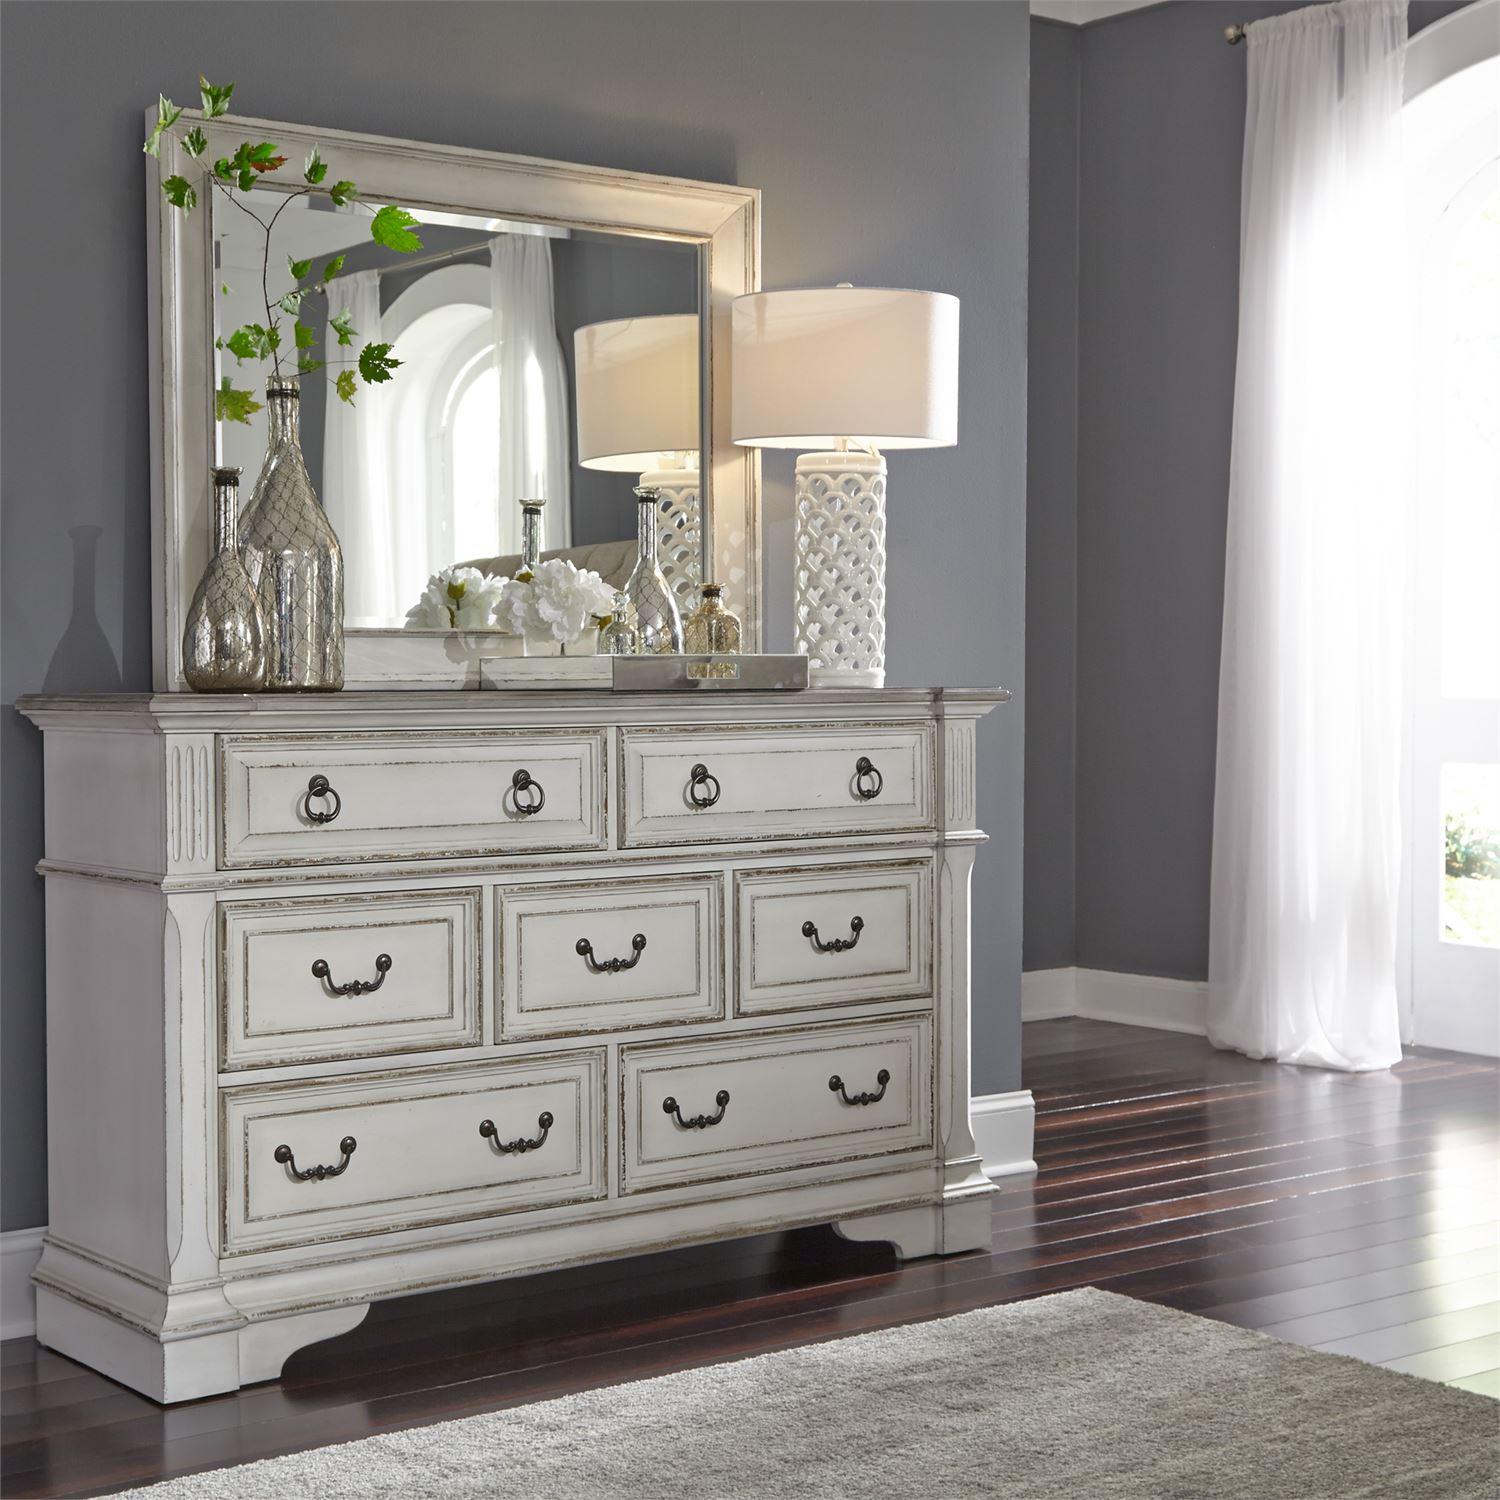 Liberty Furniture Abbey Park  520-BR-DM Dresser With Mirror